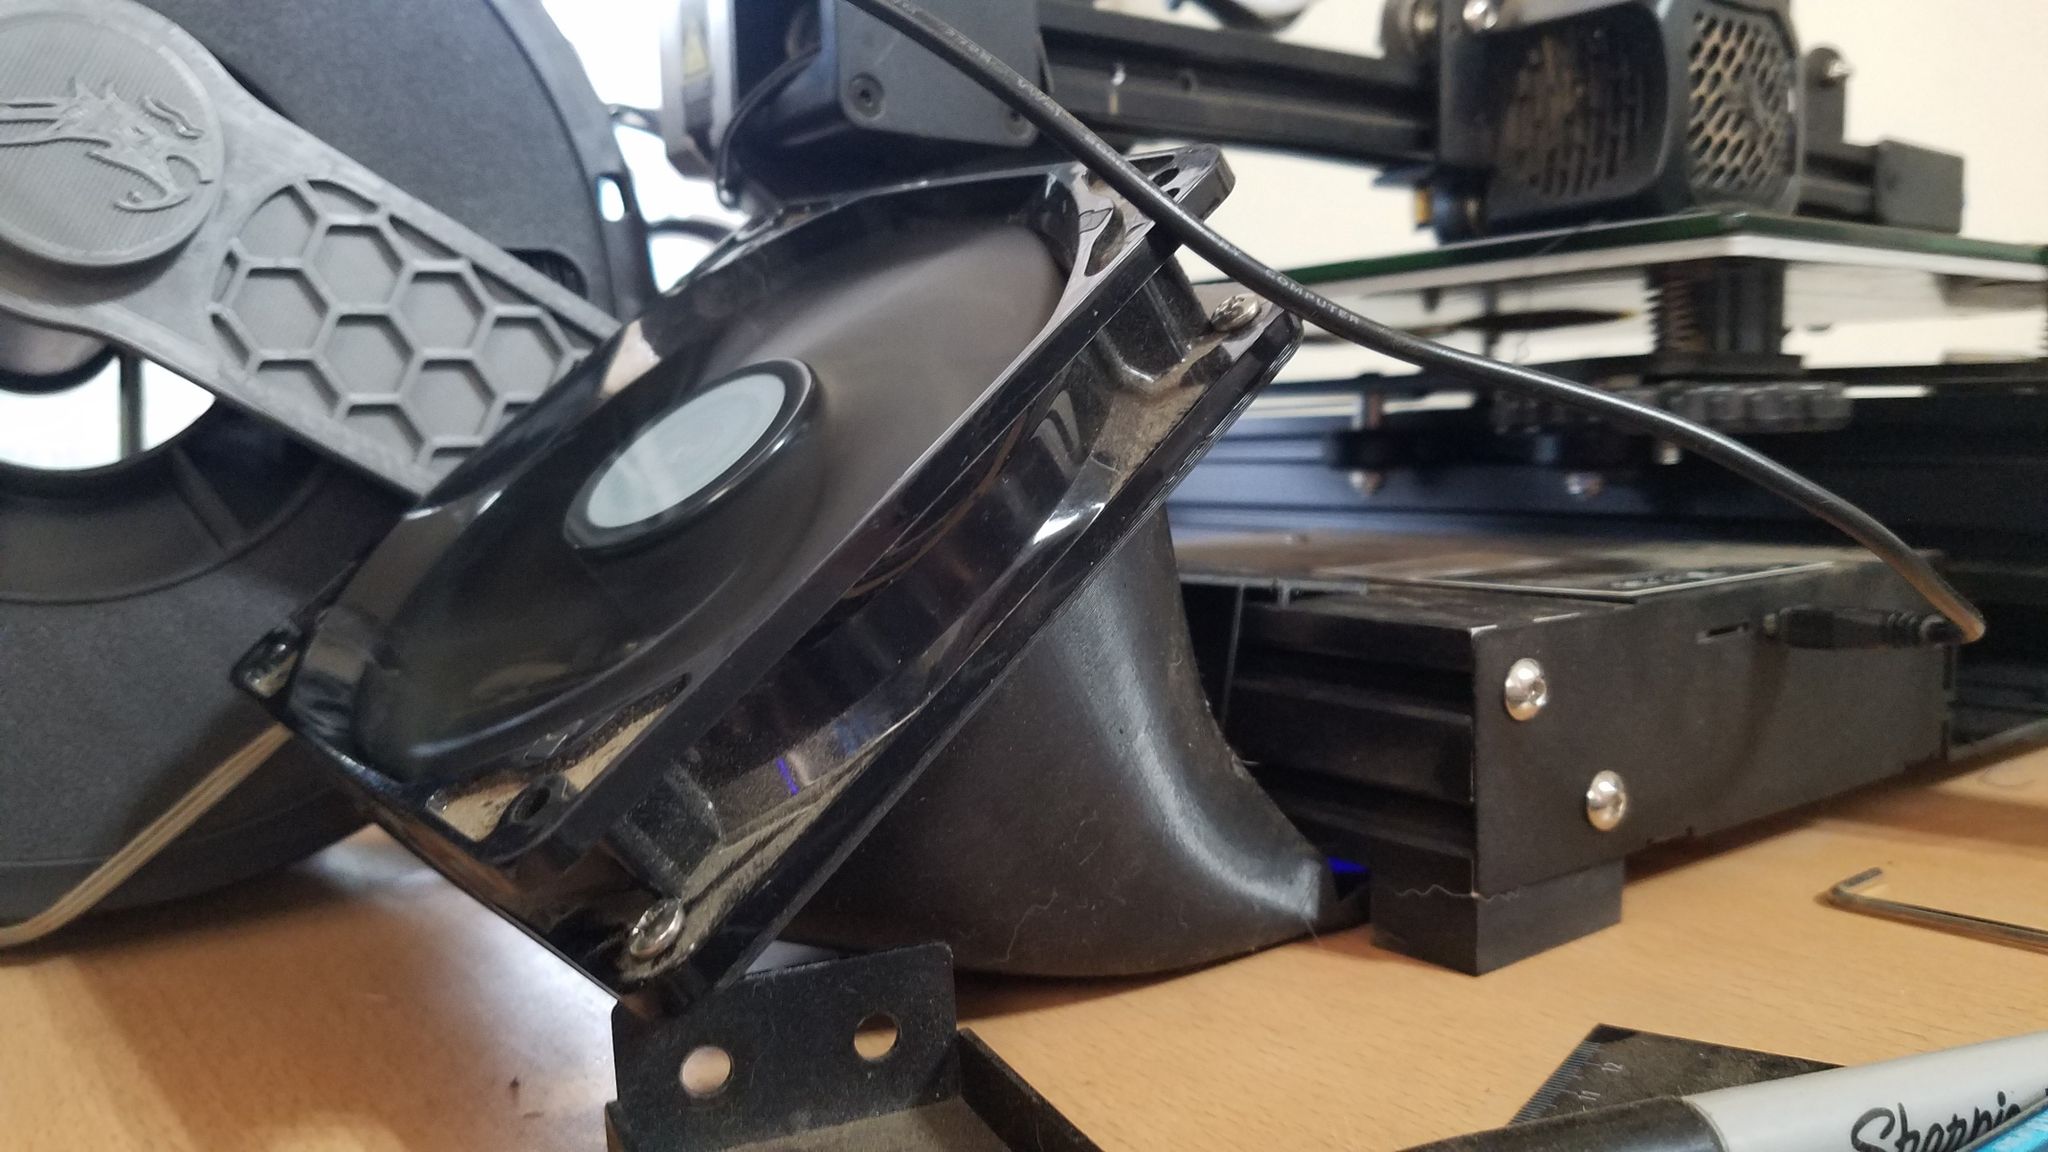 Fan Duct for Ender 3 Main Board Cooling